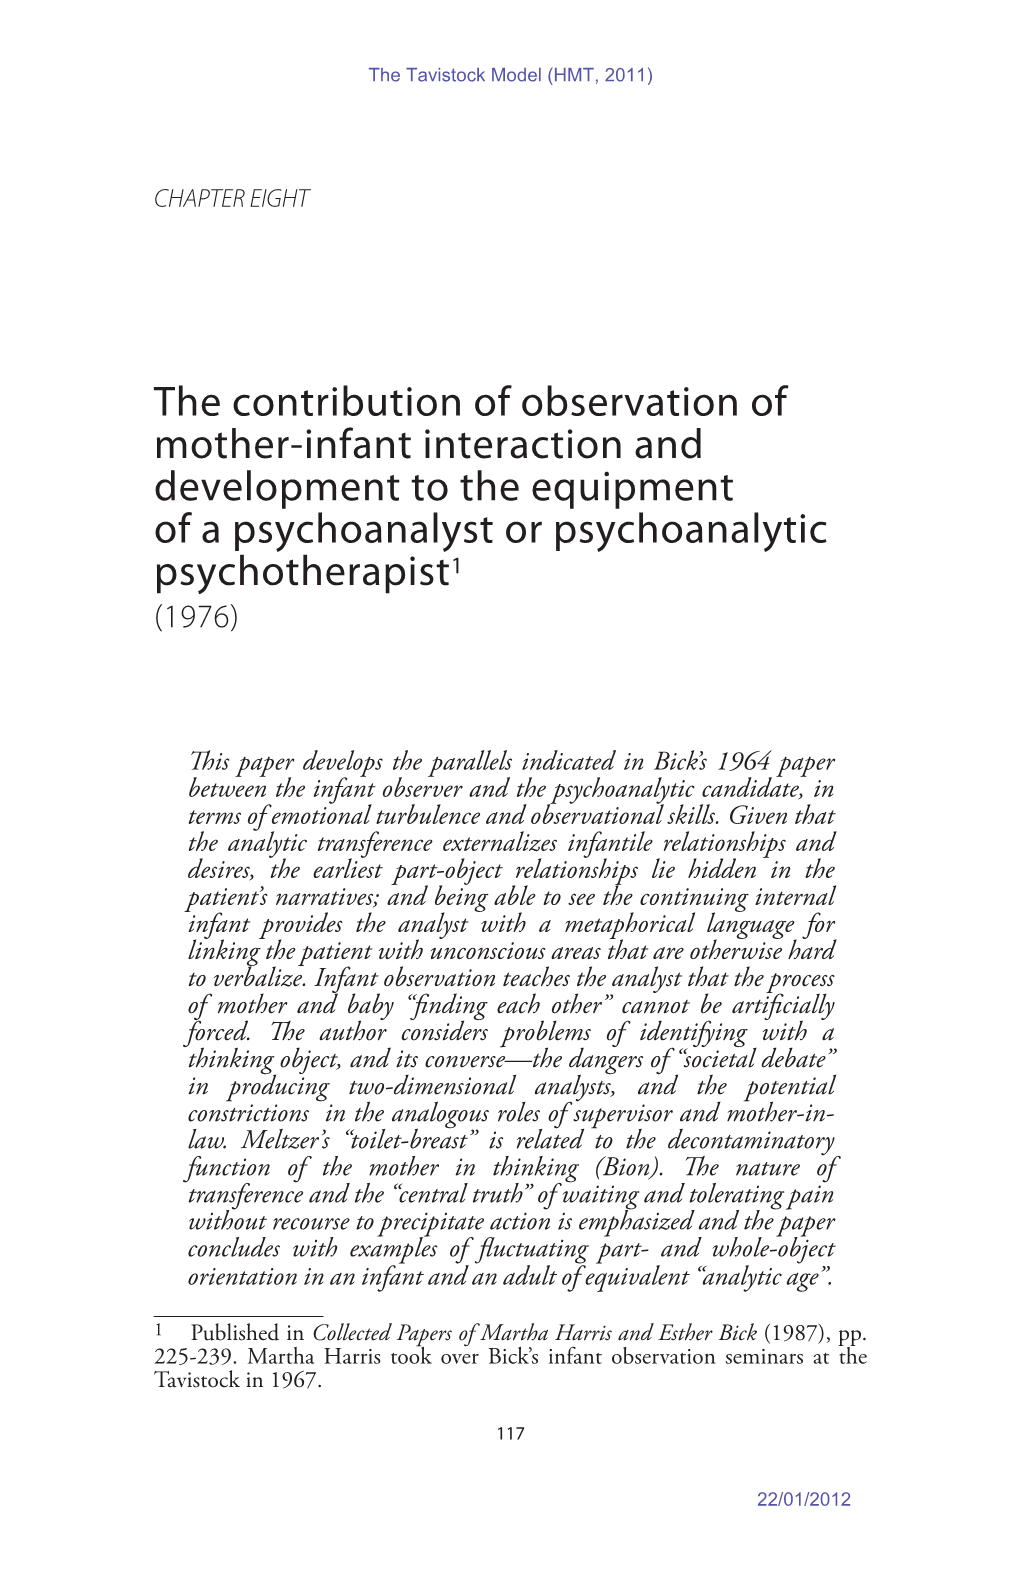 The Contribution of Observation of Mother-Infant Interaction and Development to the Equipment of a Psychoanalyst Or Psychoanalytic Psychotherapist1 (1976)